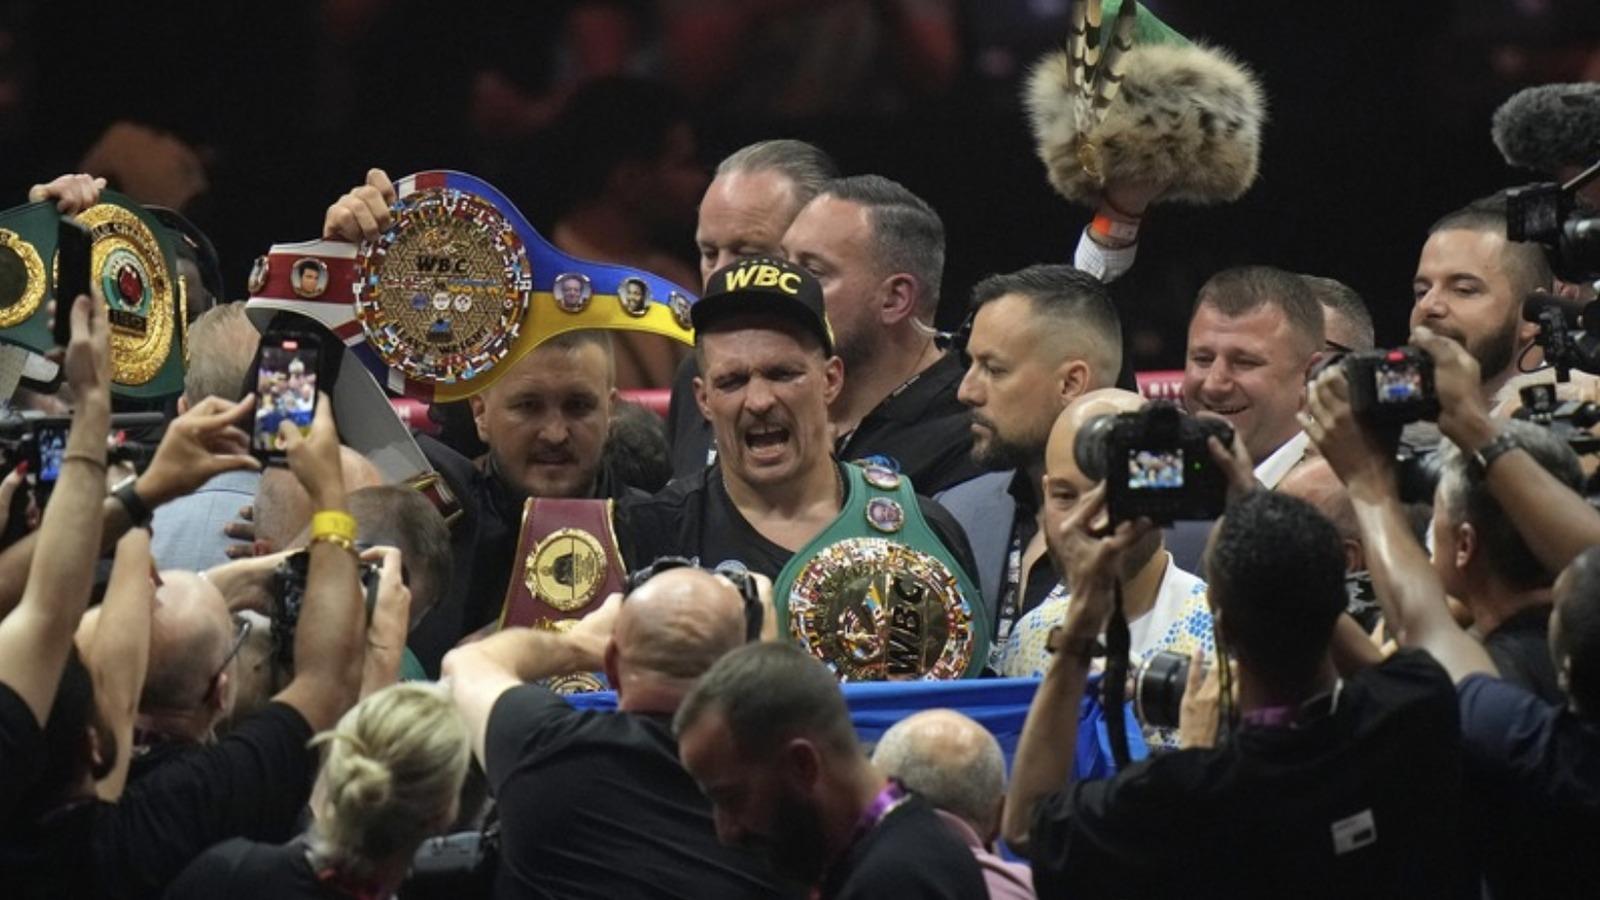 Oleksandr Usyk just finished his battle with Tyson Fury, but boxing fans are already asking what’s next for the Ukrainian star